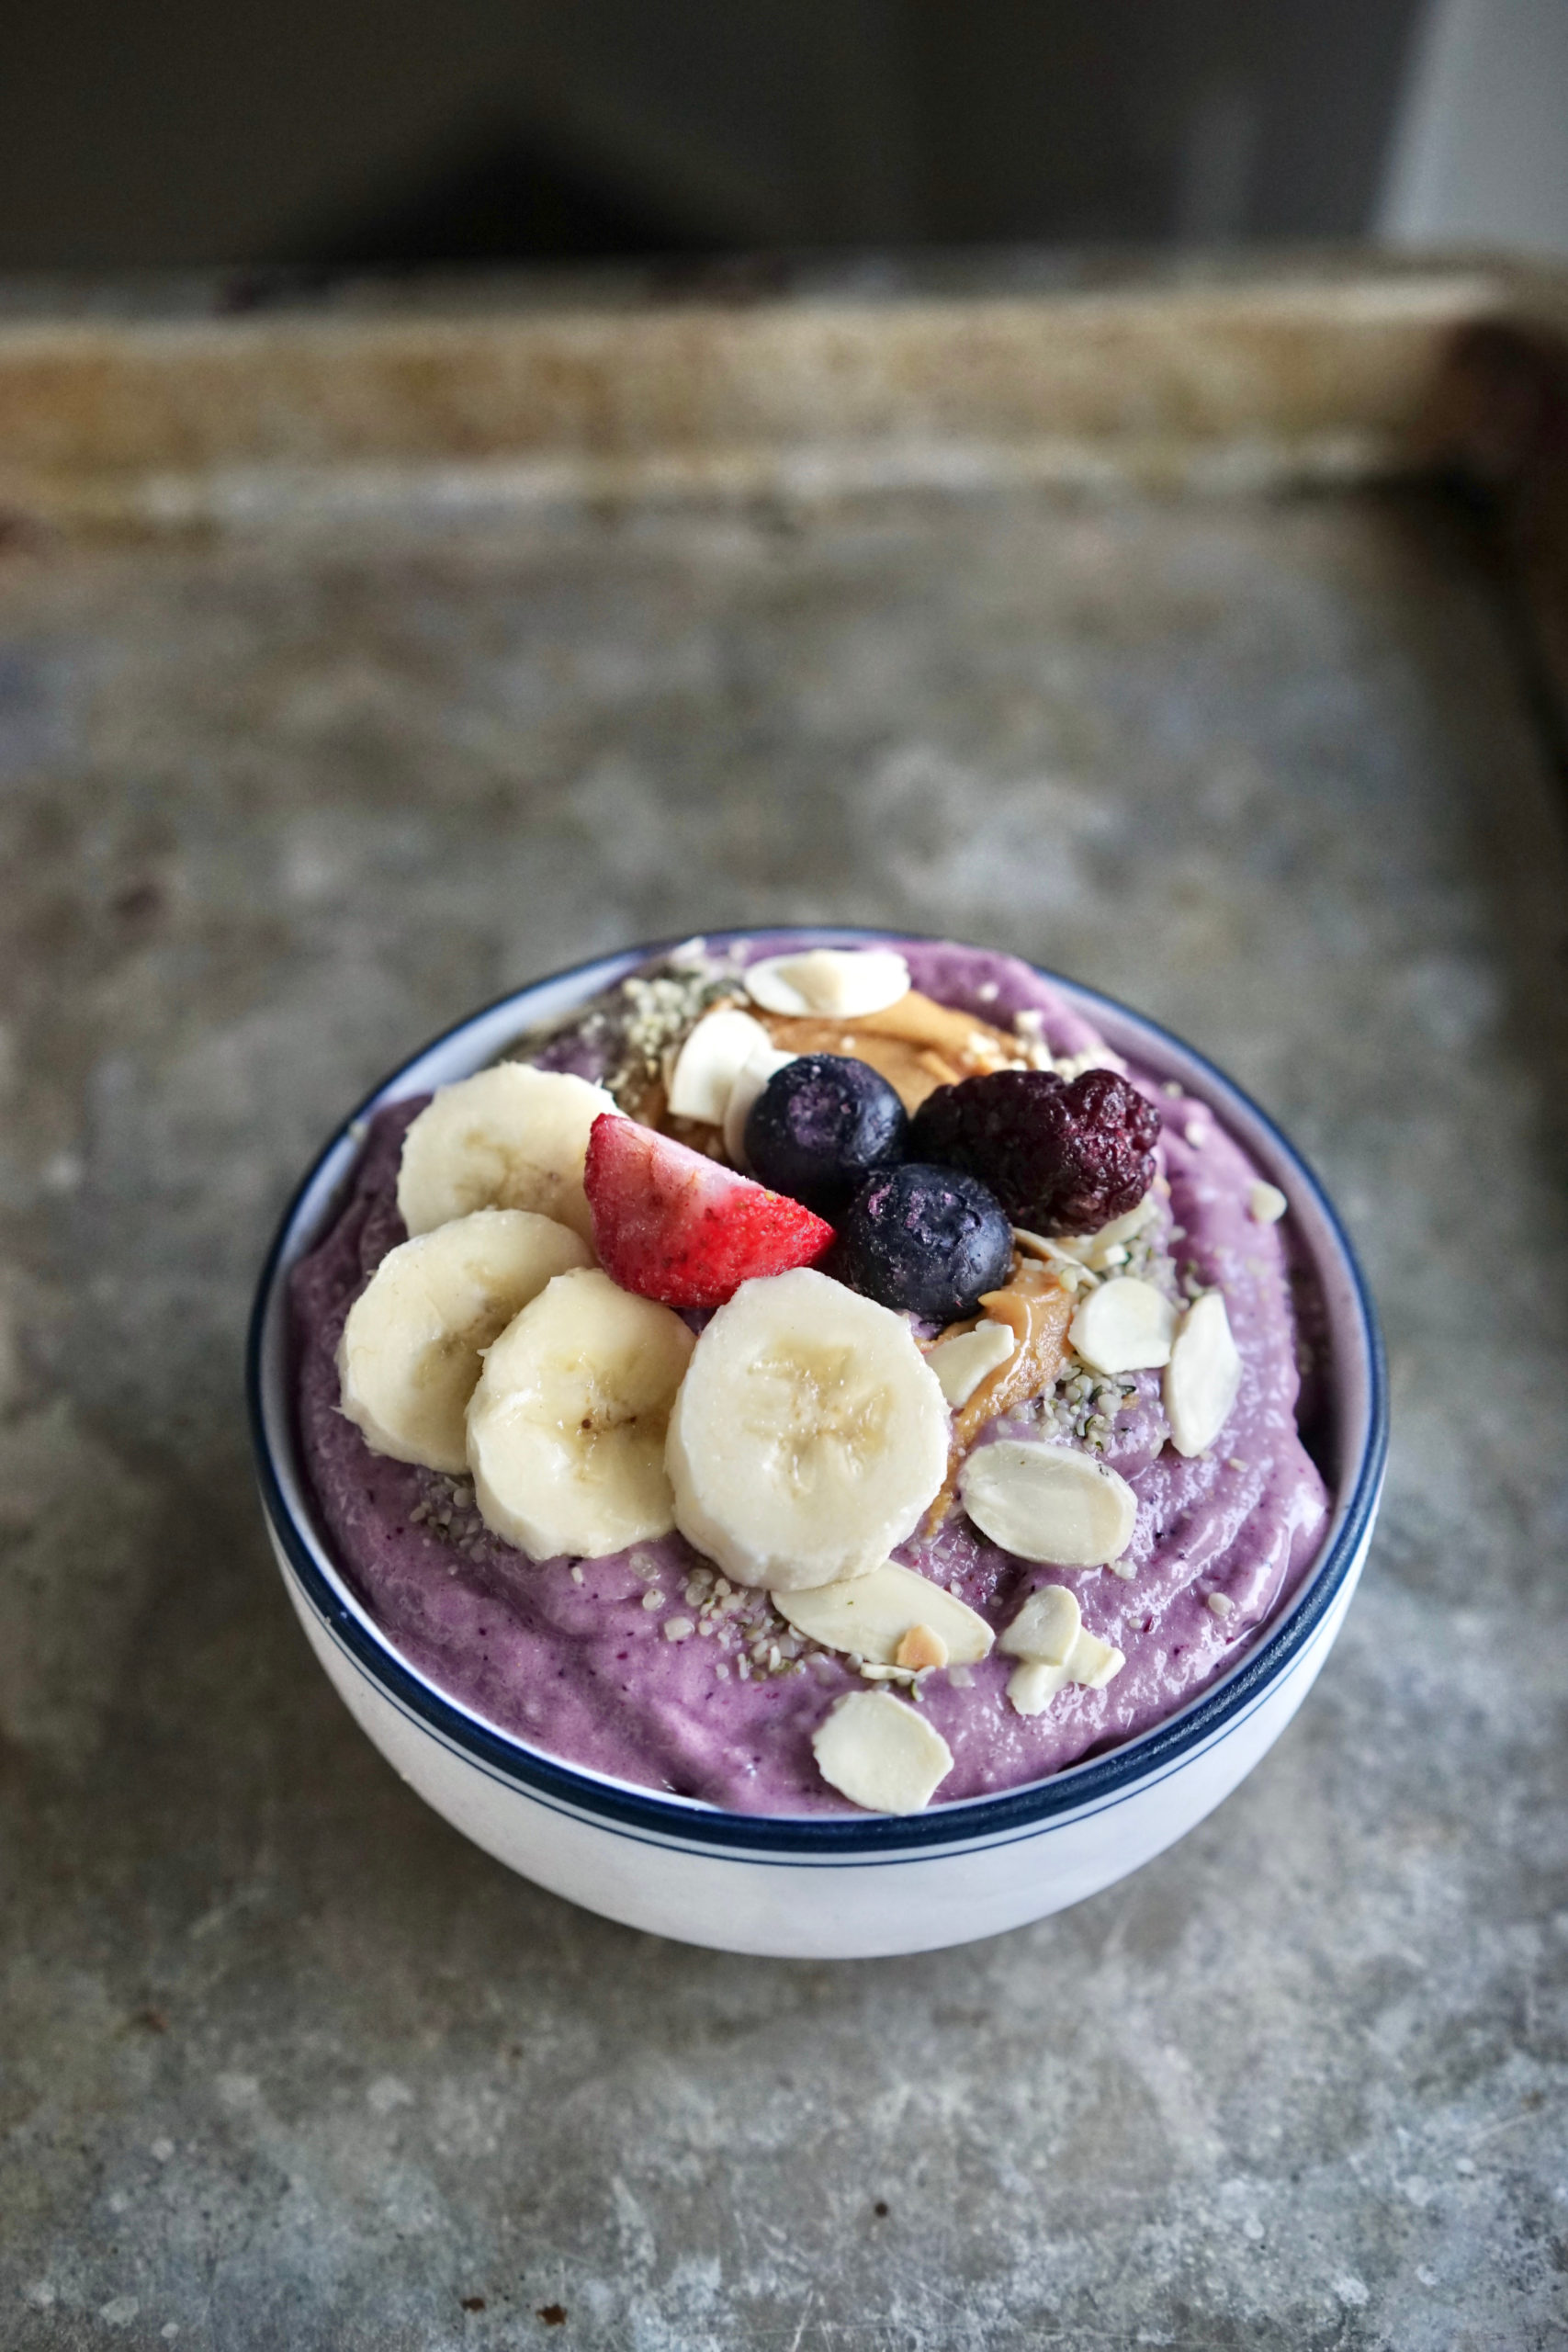 https://www.livinghealthyinseattle.com/wp-content/uploads/2021/03/Peanut-Butter-Berry-Banana-Smoothie-Bowl-5-scaled.jpeg